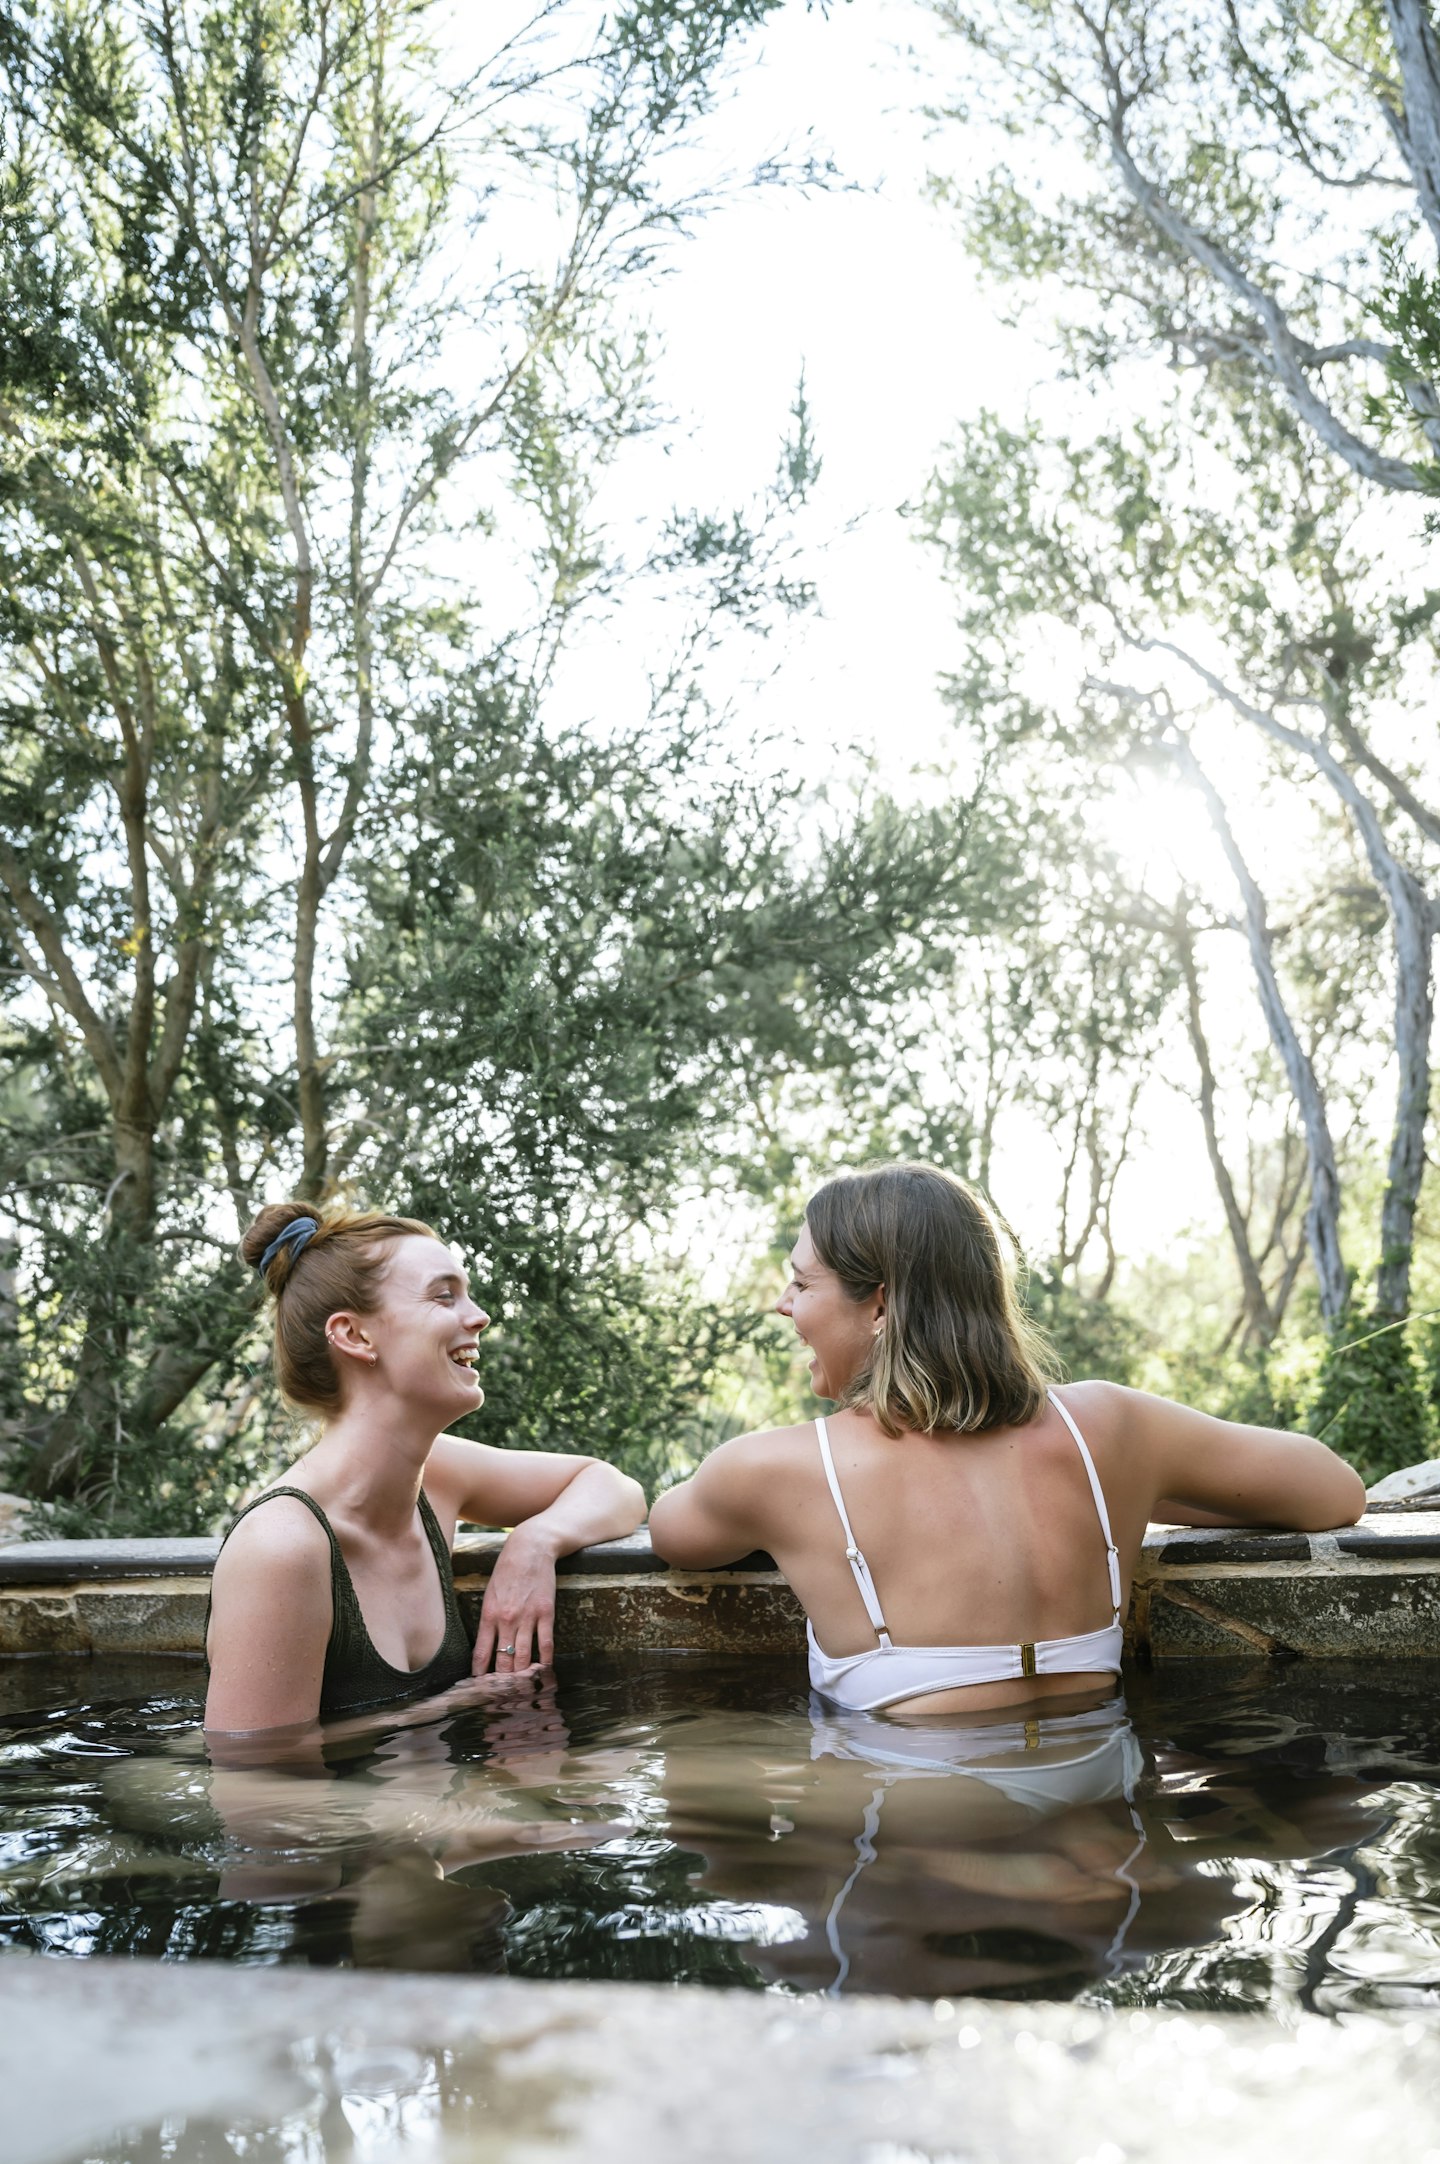 two young ladies in bathing suits laughing and relaxing in geothermal pool with sunlight breaking through trees